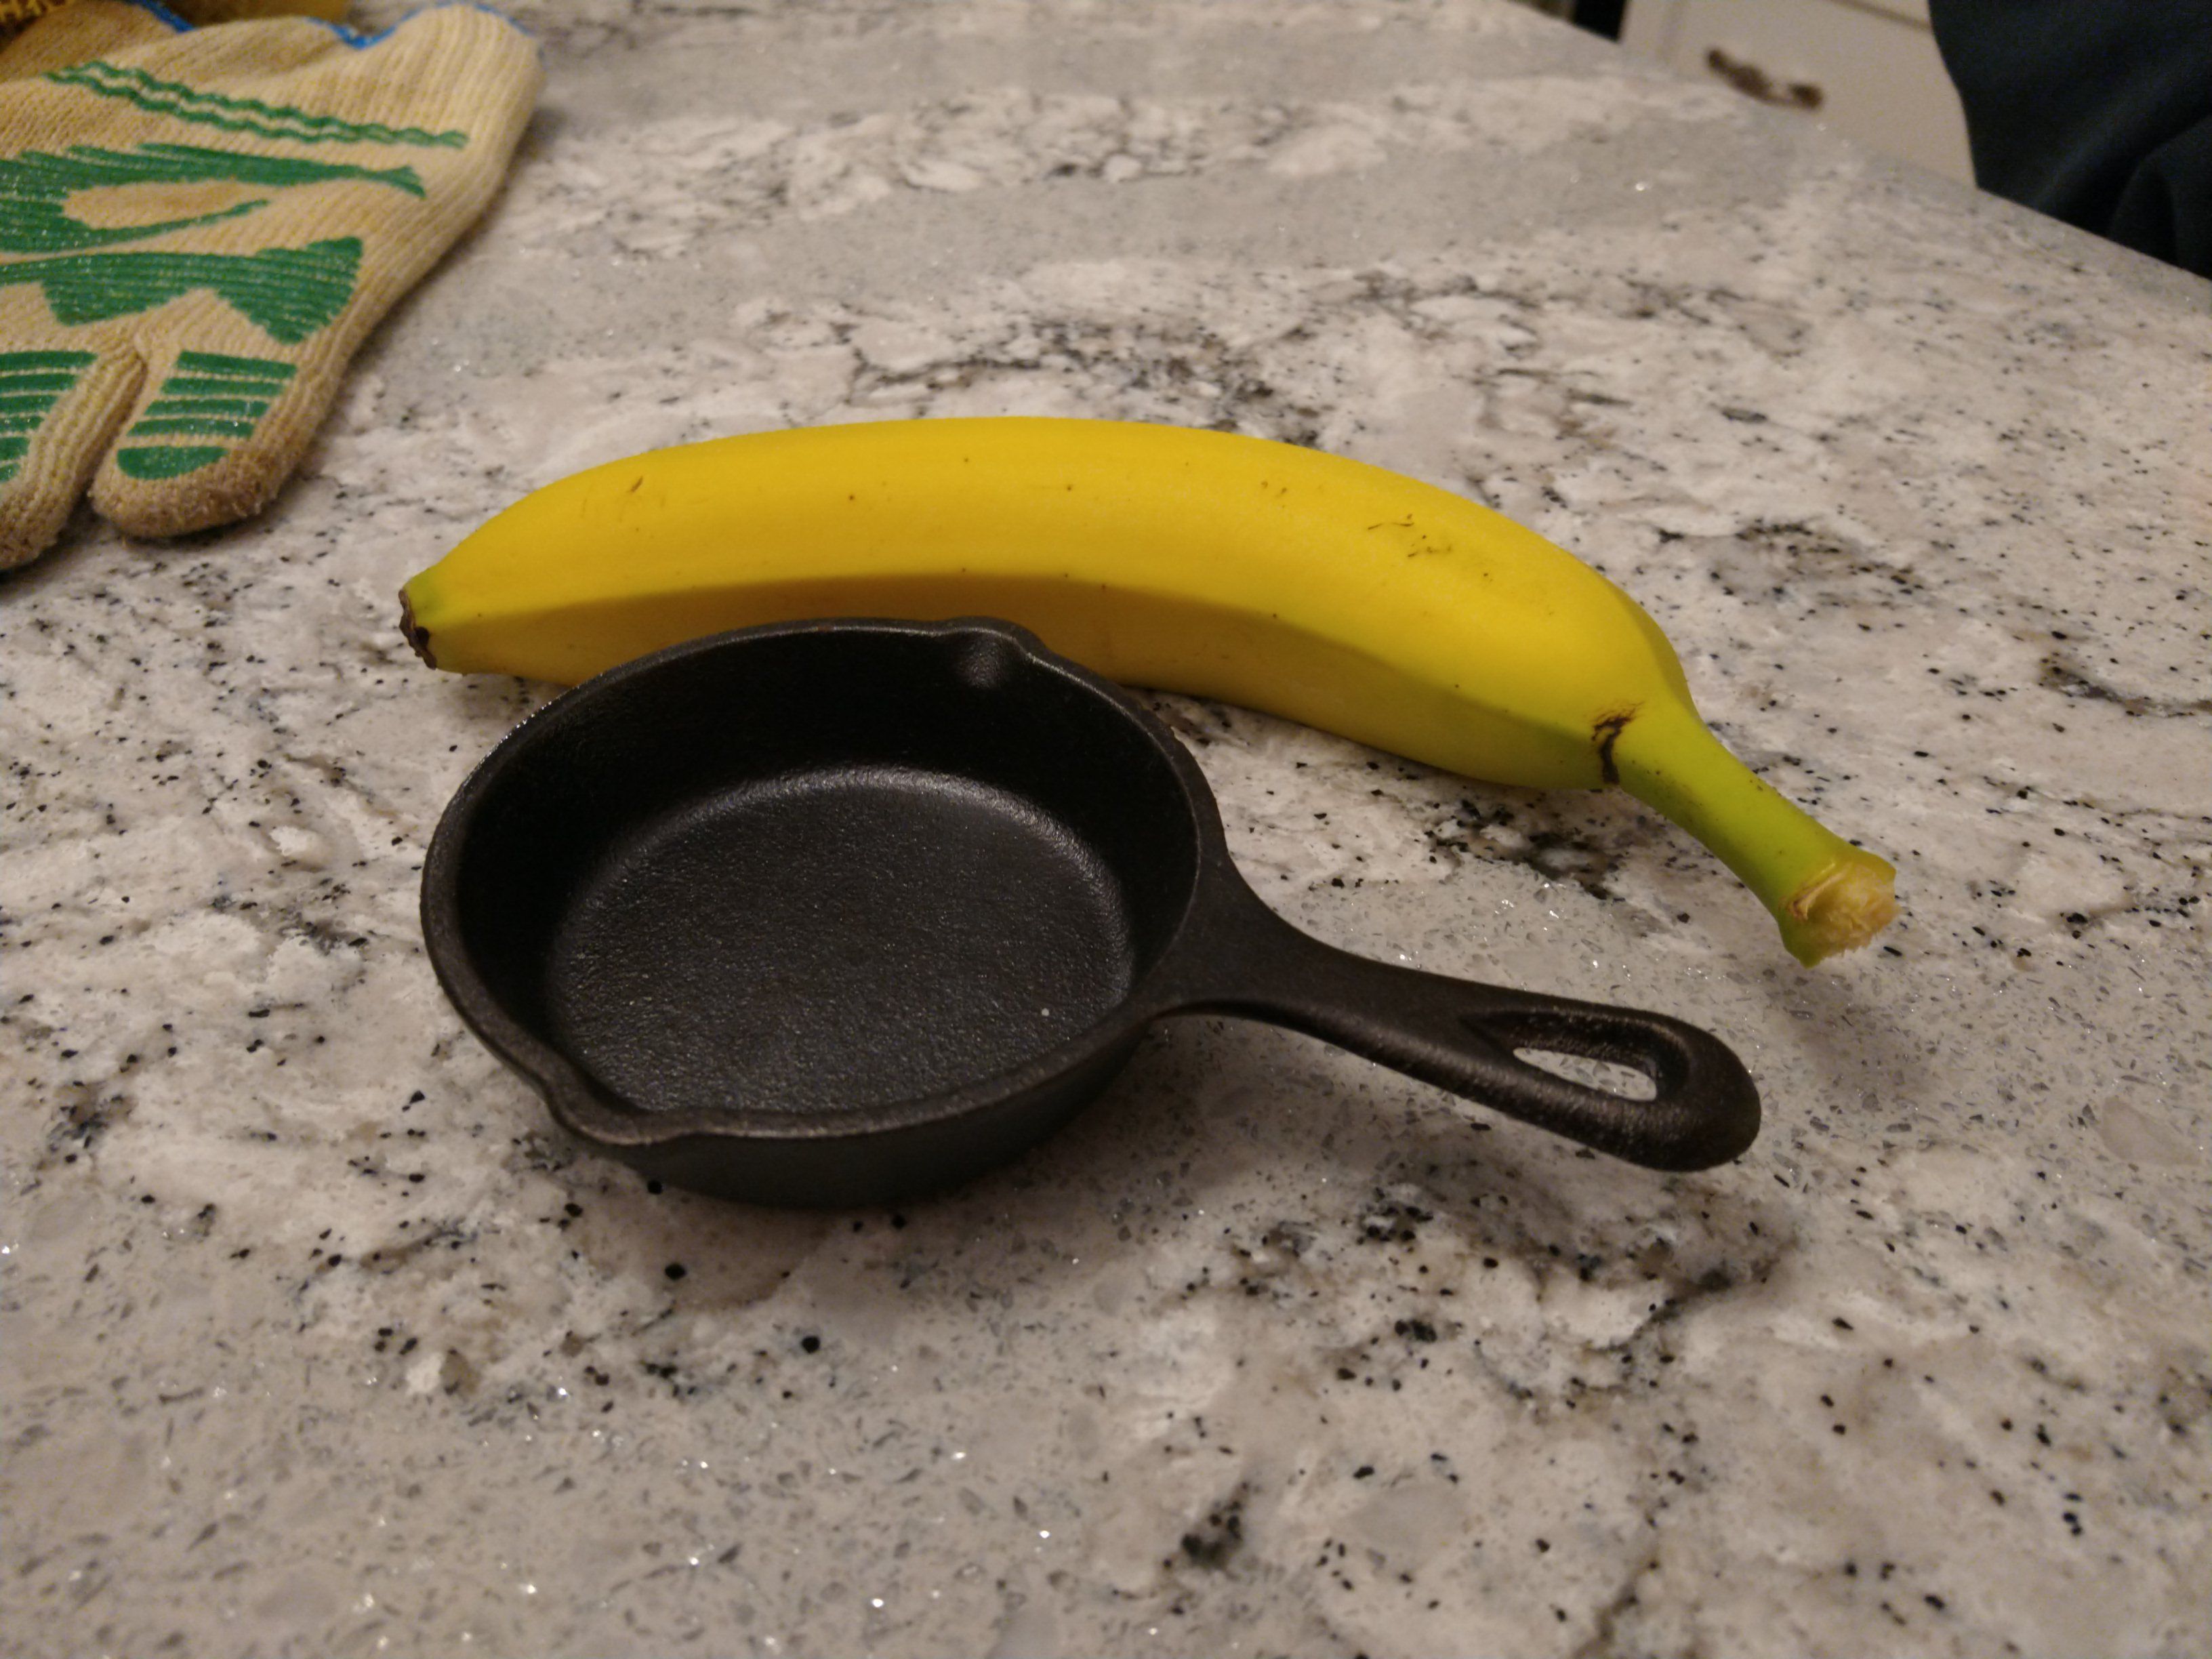 Mom bought a frying pan on Amazon. I wasn't disappointed.